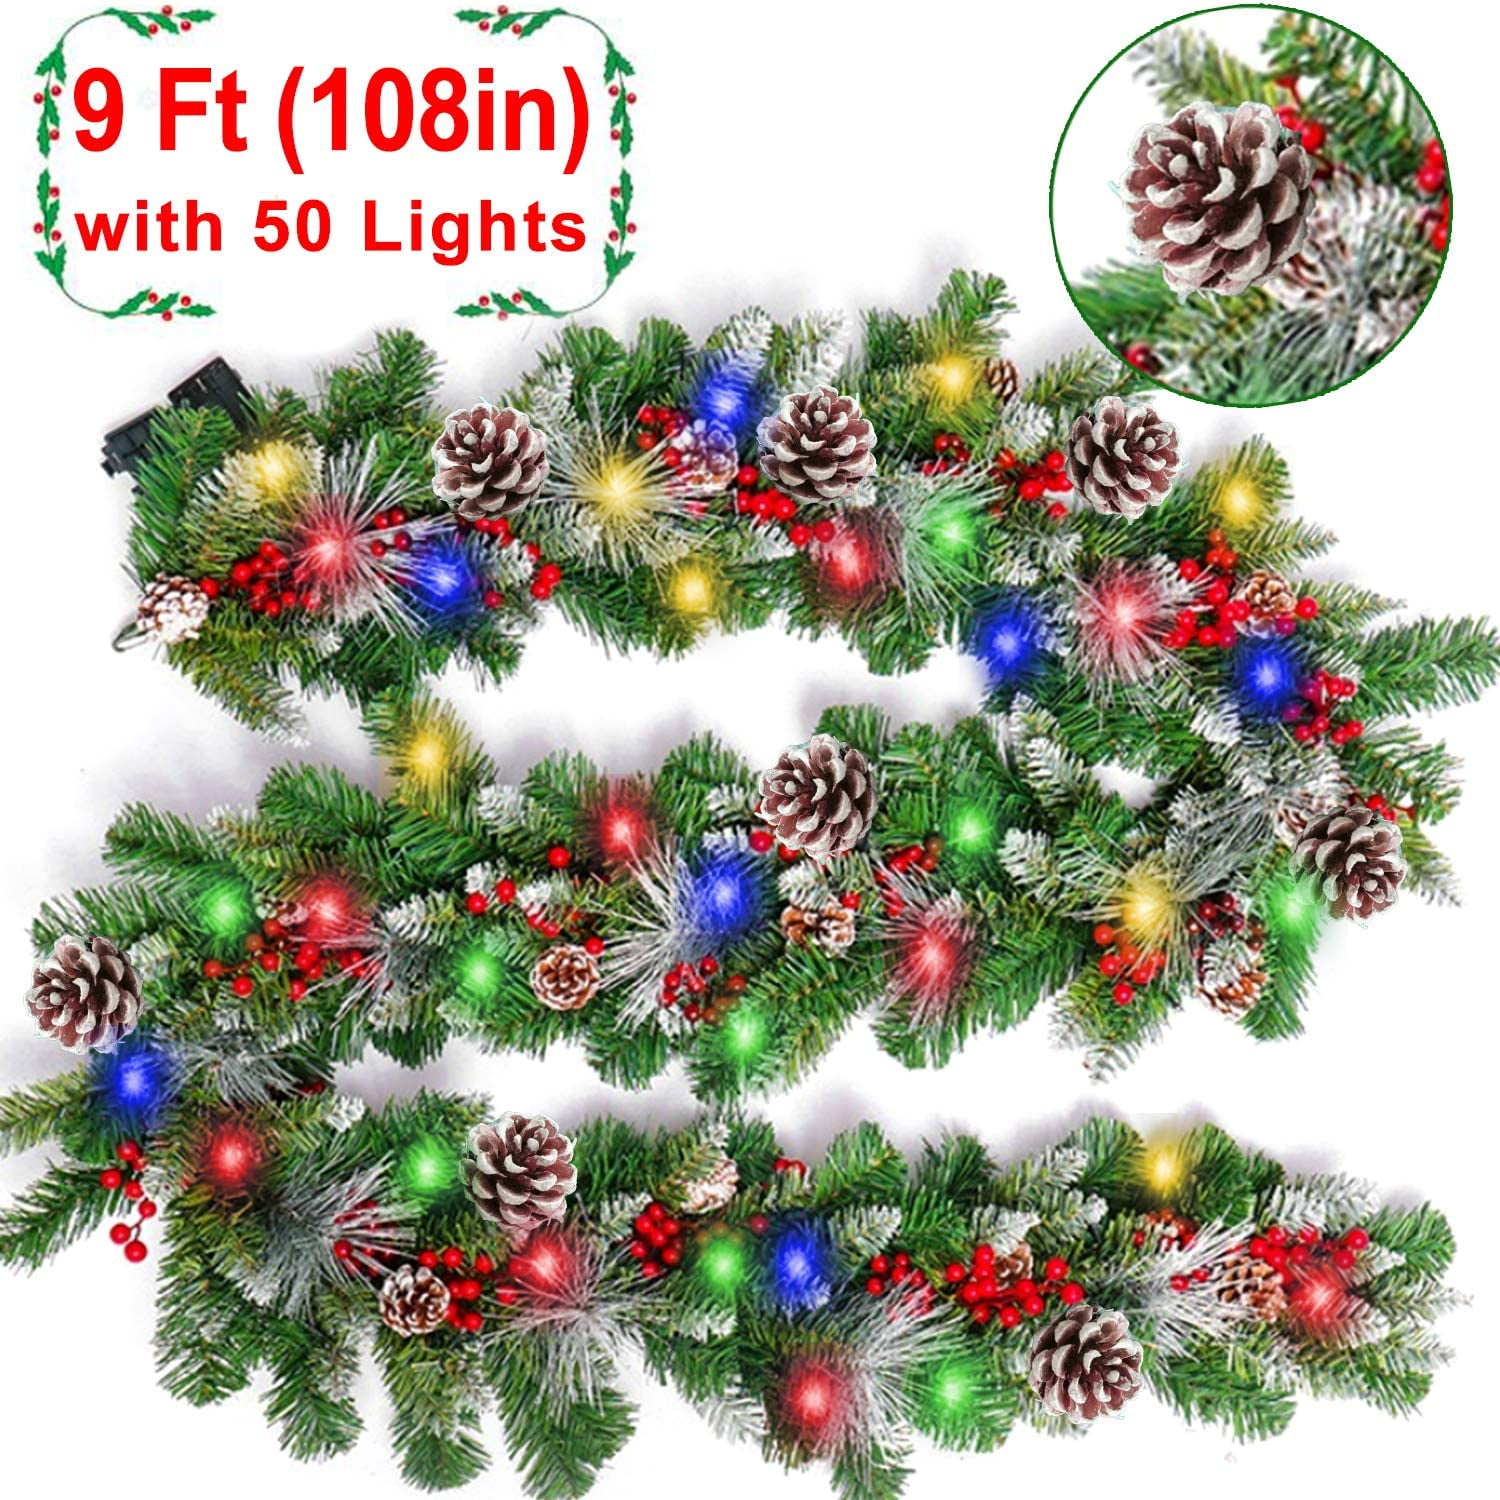 Decorated Christmas Garland Red Frosted Luxury Led Lights Xmas Best Artificial 